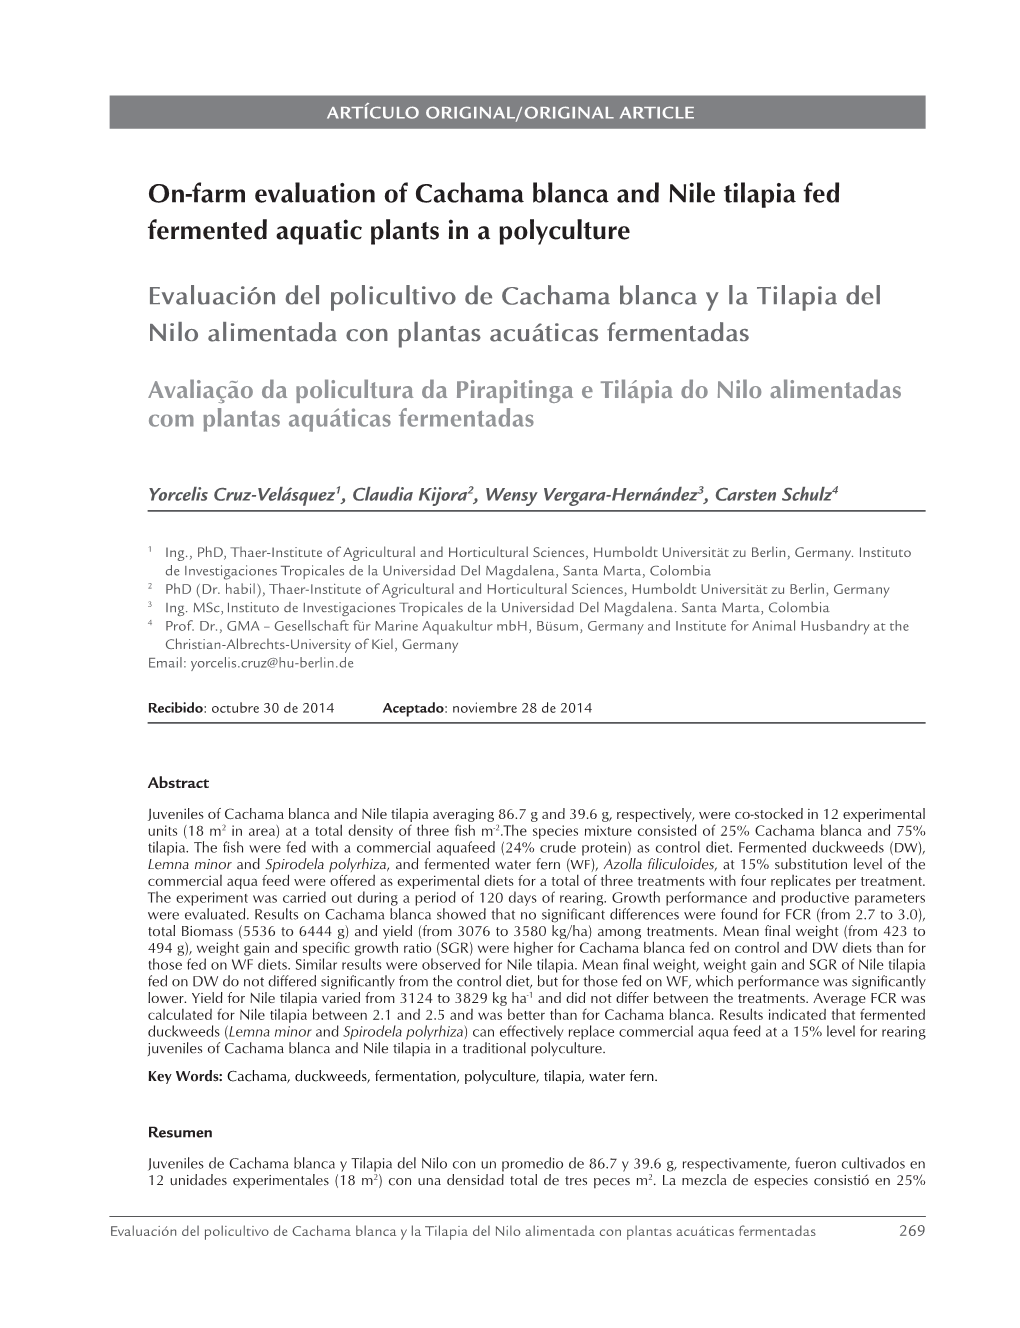 On-Farm Evaluation of Cachama Blanca and Nile Tilapia Fed Fermented Aquatic Plants in a Polyculture